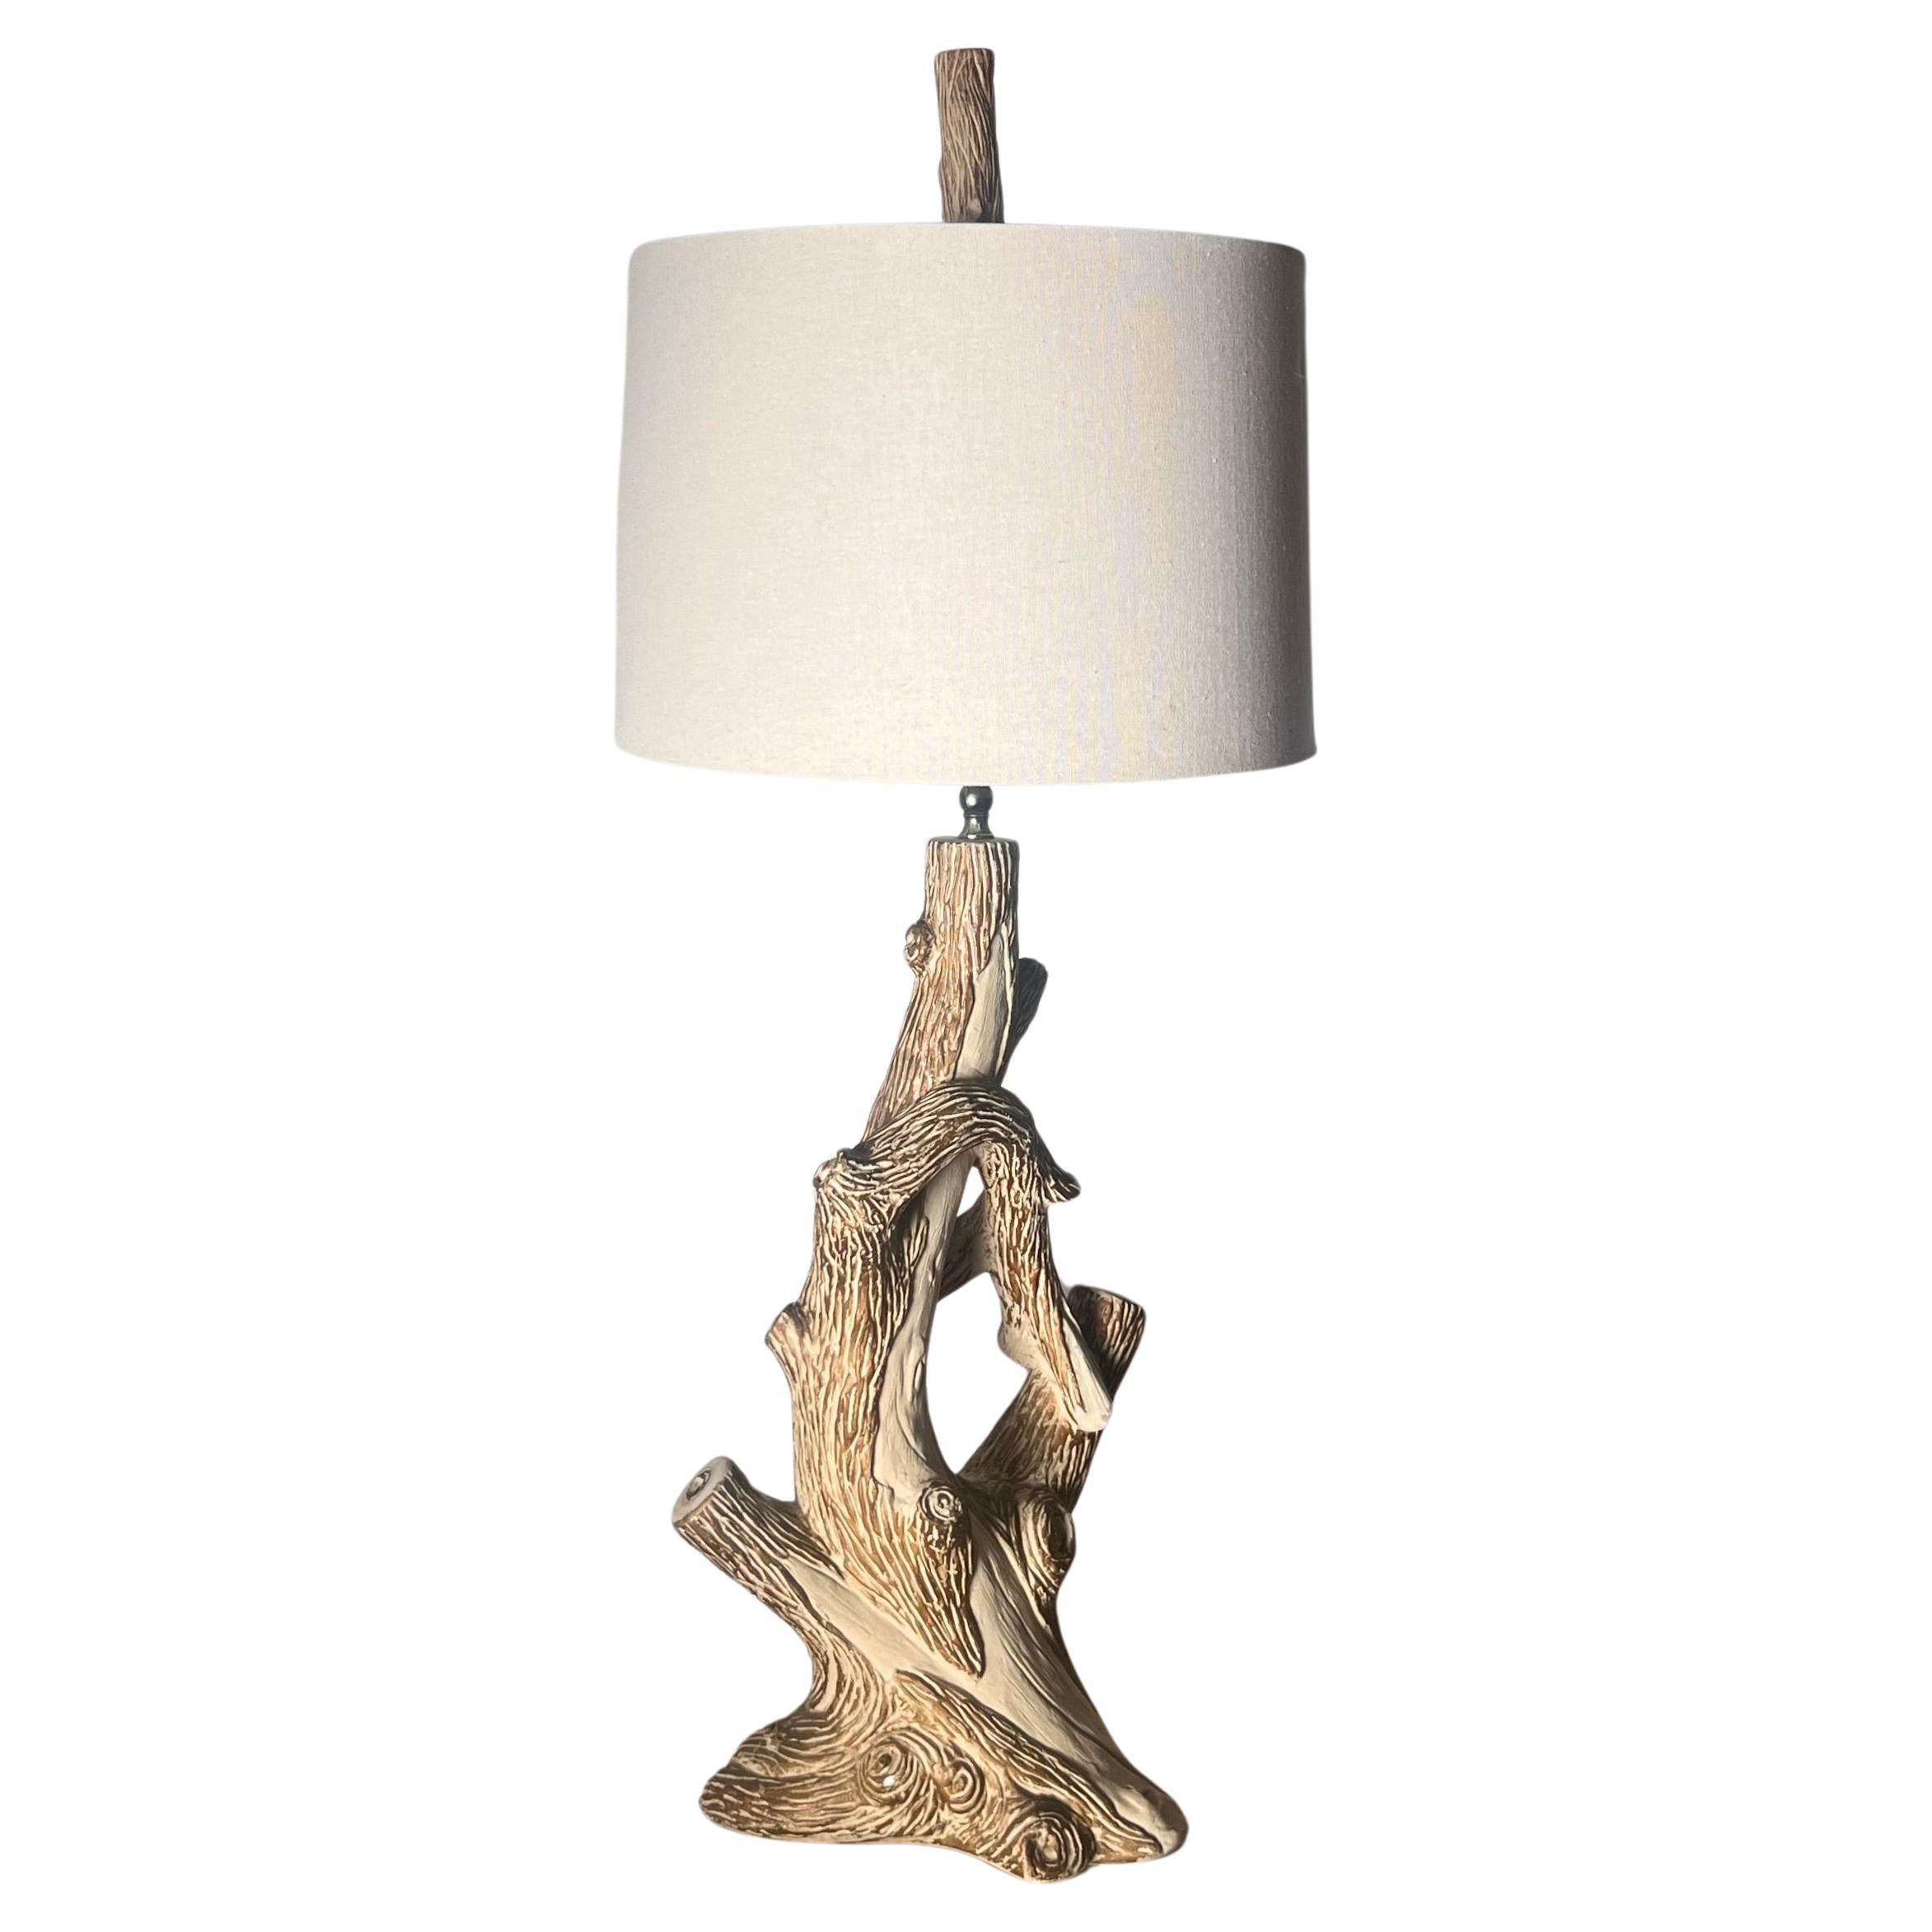 Mid century faux bois table lamp, circa early 1960s.  For Sale